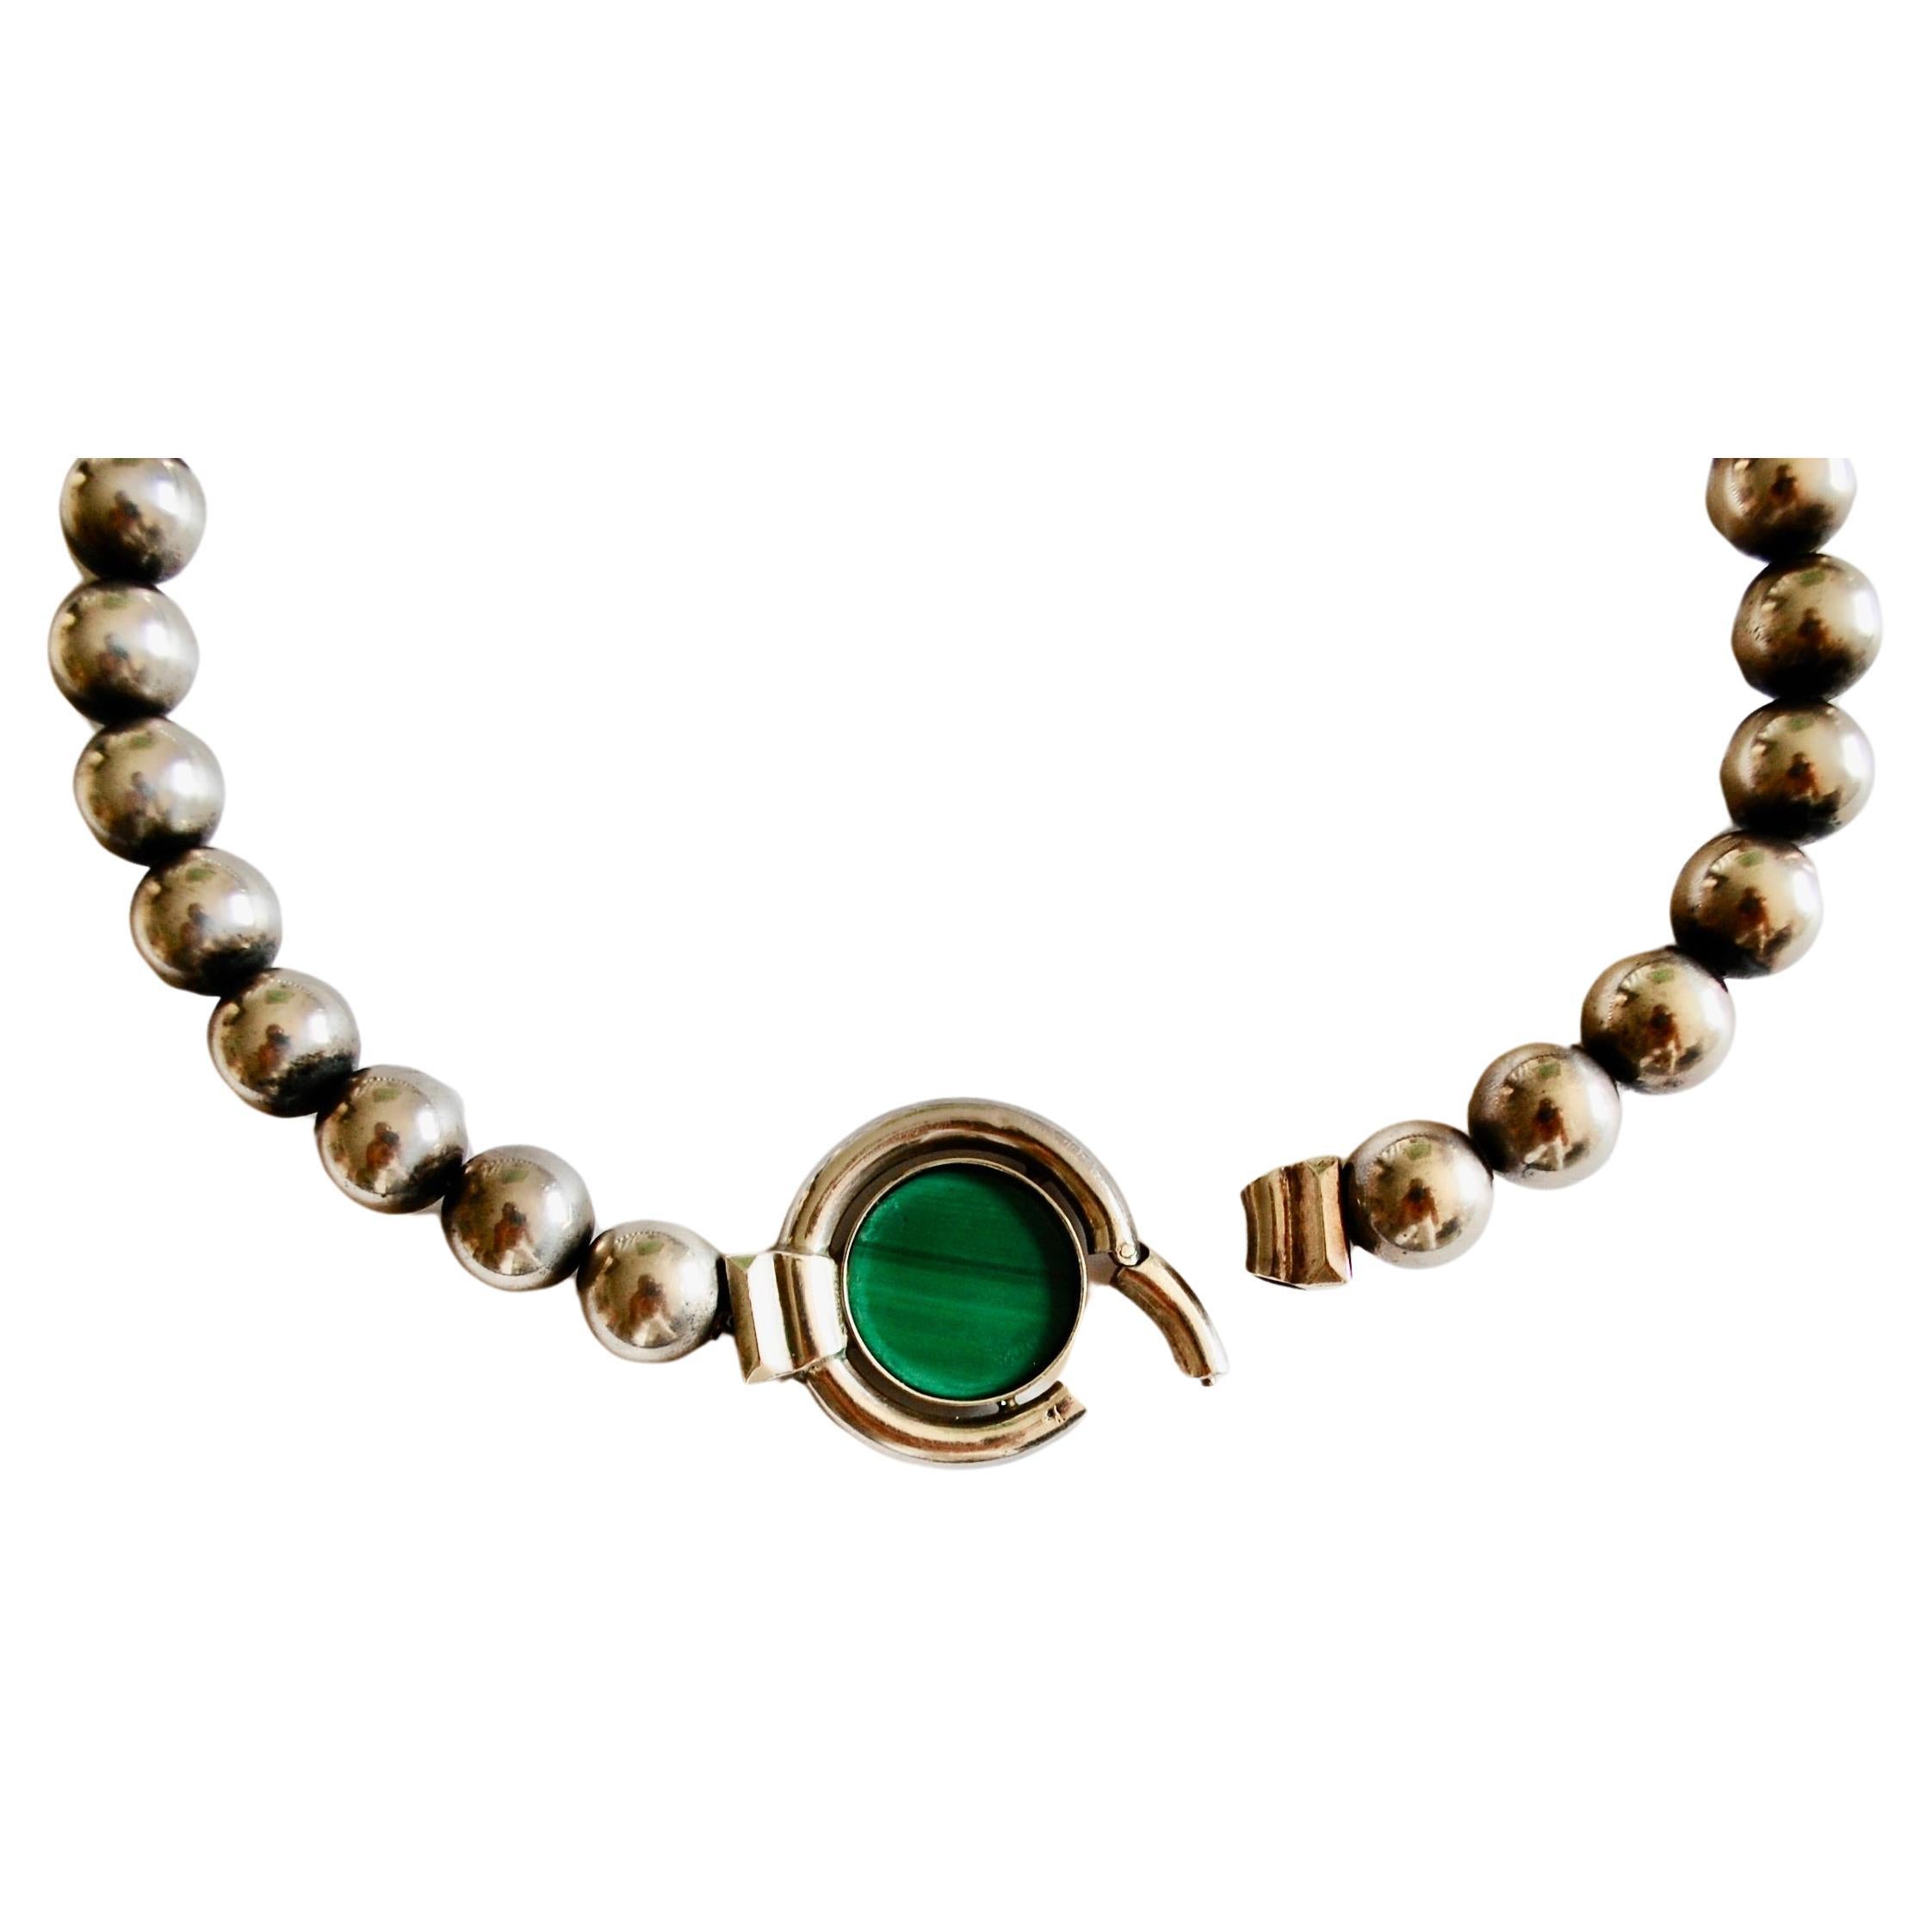 Classical Roman Vintage Italian Carved Malachite Sterling Necklace  For Sale